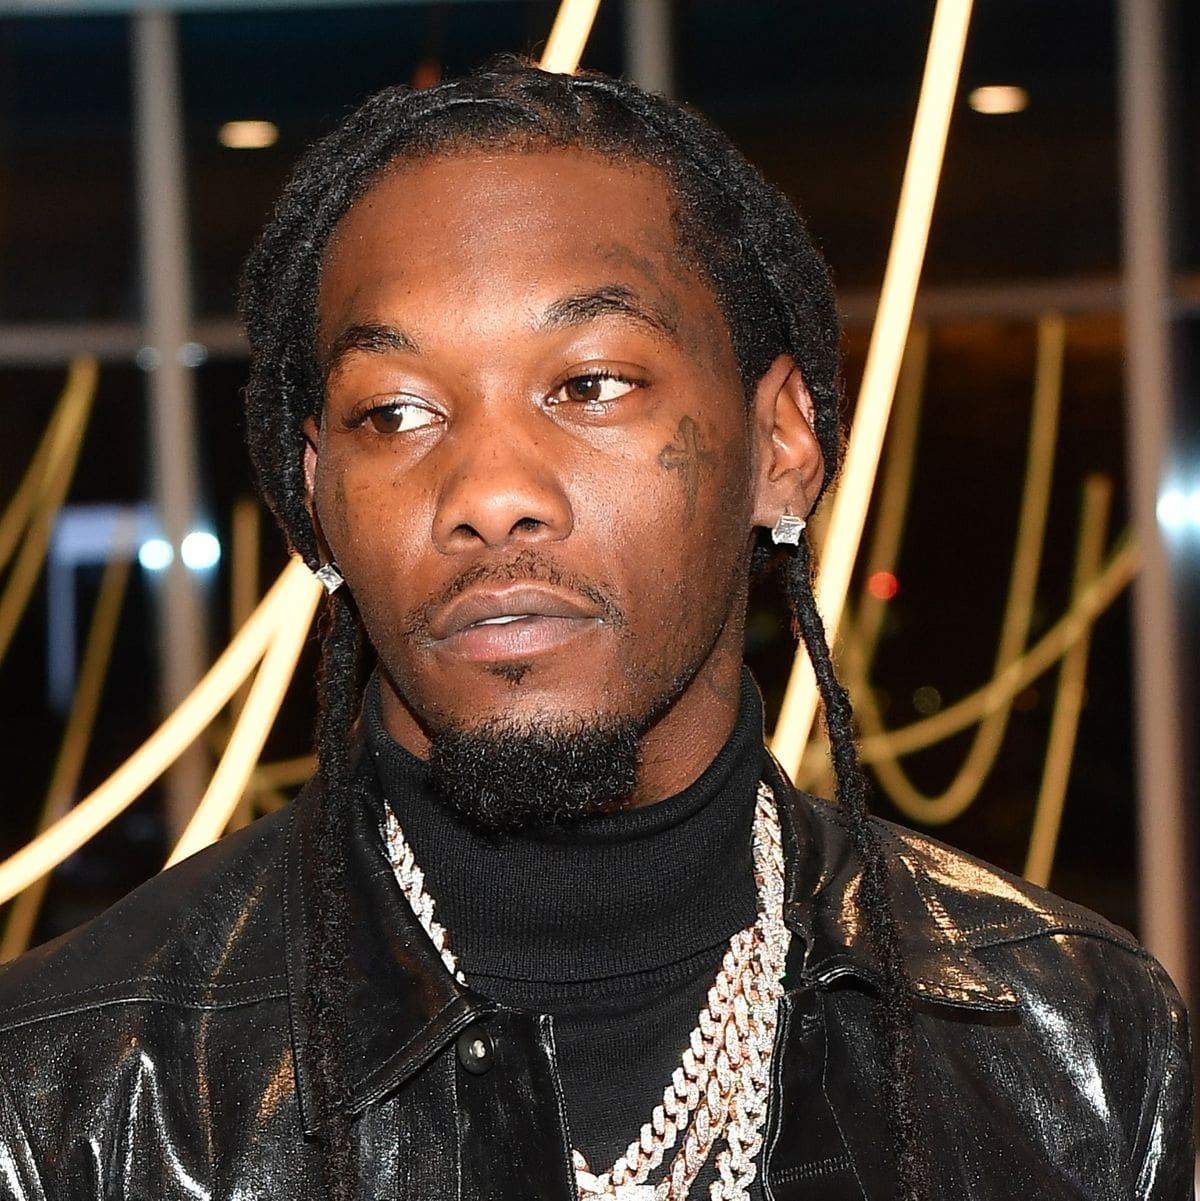 offset-rings-nasdaq-bell-check-out-the-latest-details